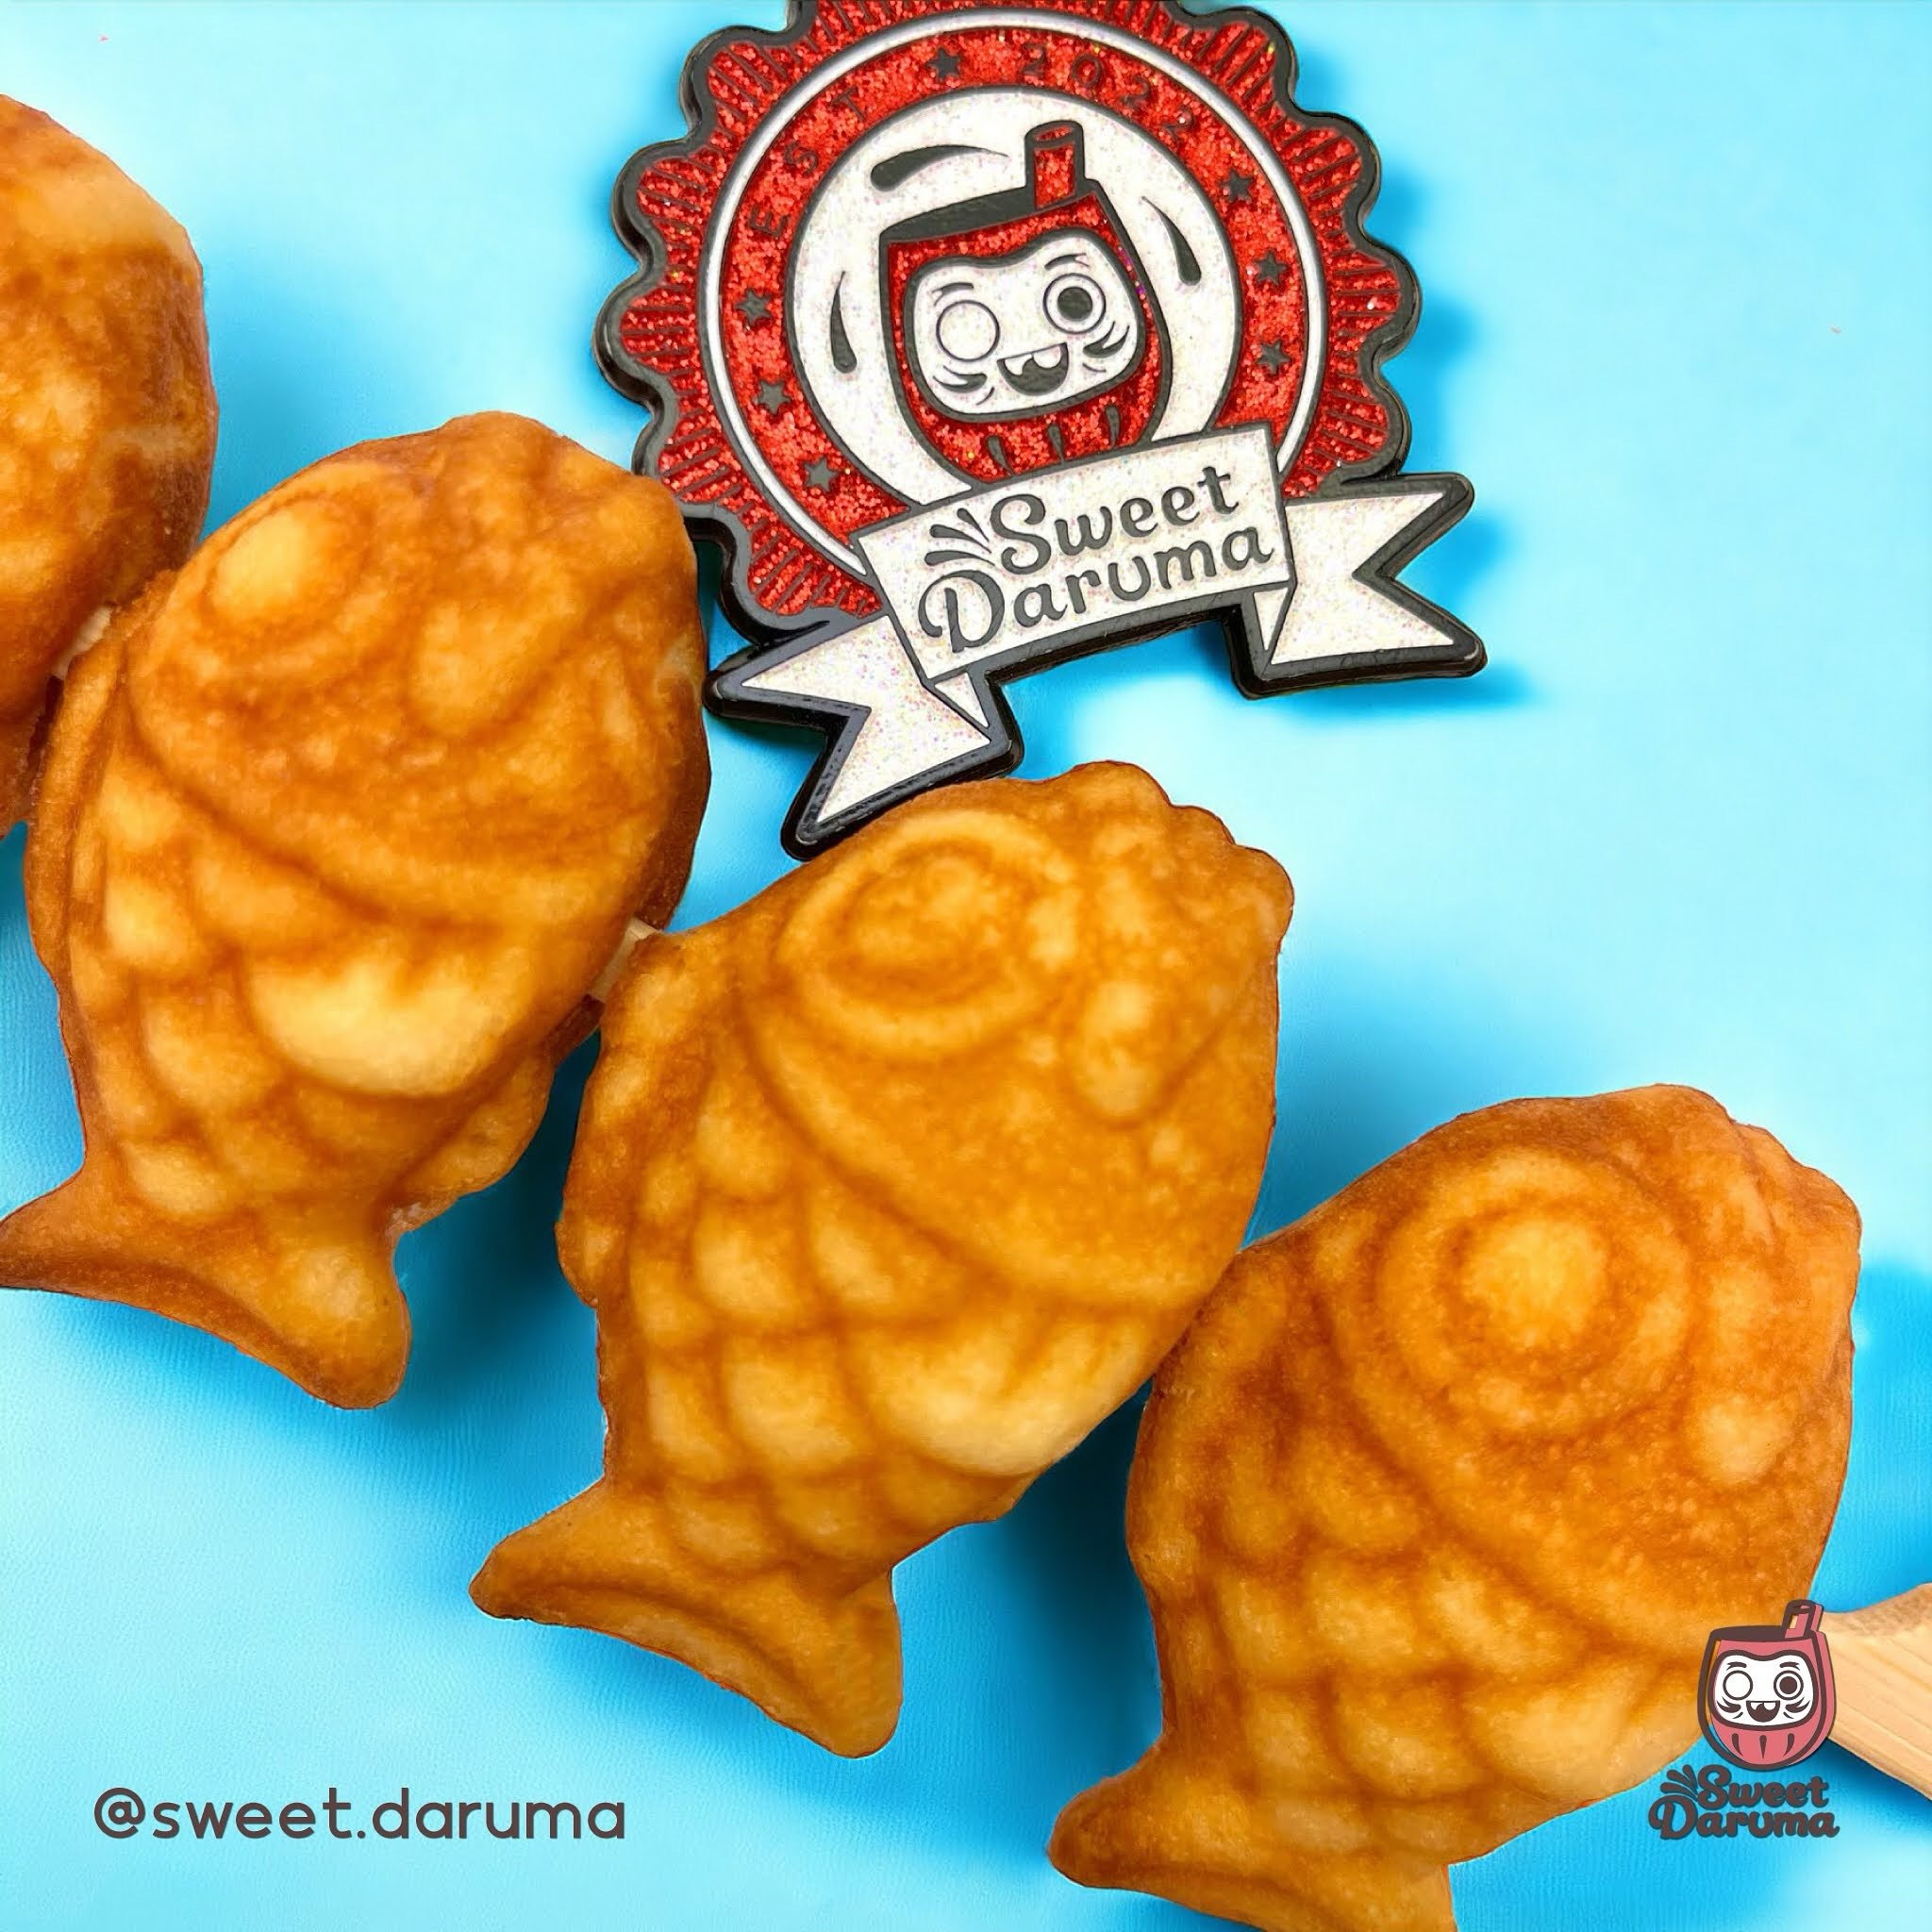 Swing by the tea wagon and flash your Sweet Daruma 100 pin to snag our latest treat: Mini Mochi Taiyaki! This exclusive offer runs until Sunday, May 19th. Don&rsquo;t miss out&mdash;come say &ldquo;Hi!&rdquo; and indulge in something sweet!
.
If you 